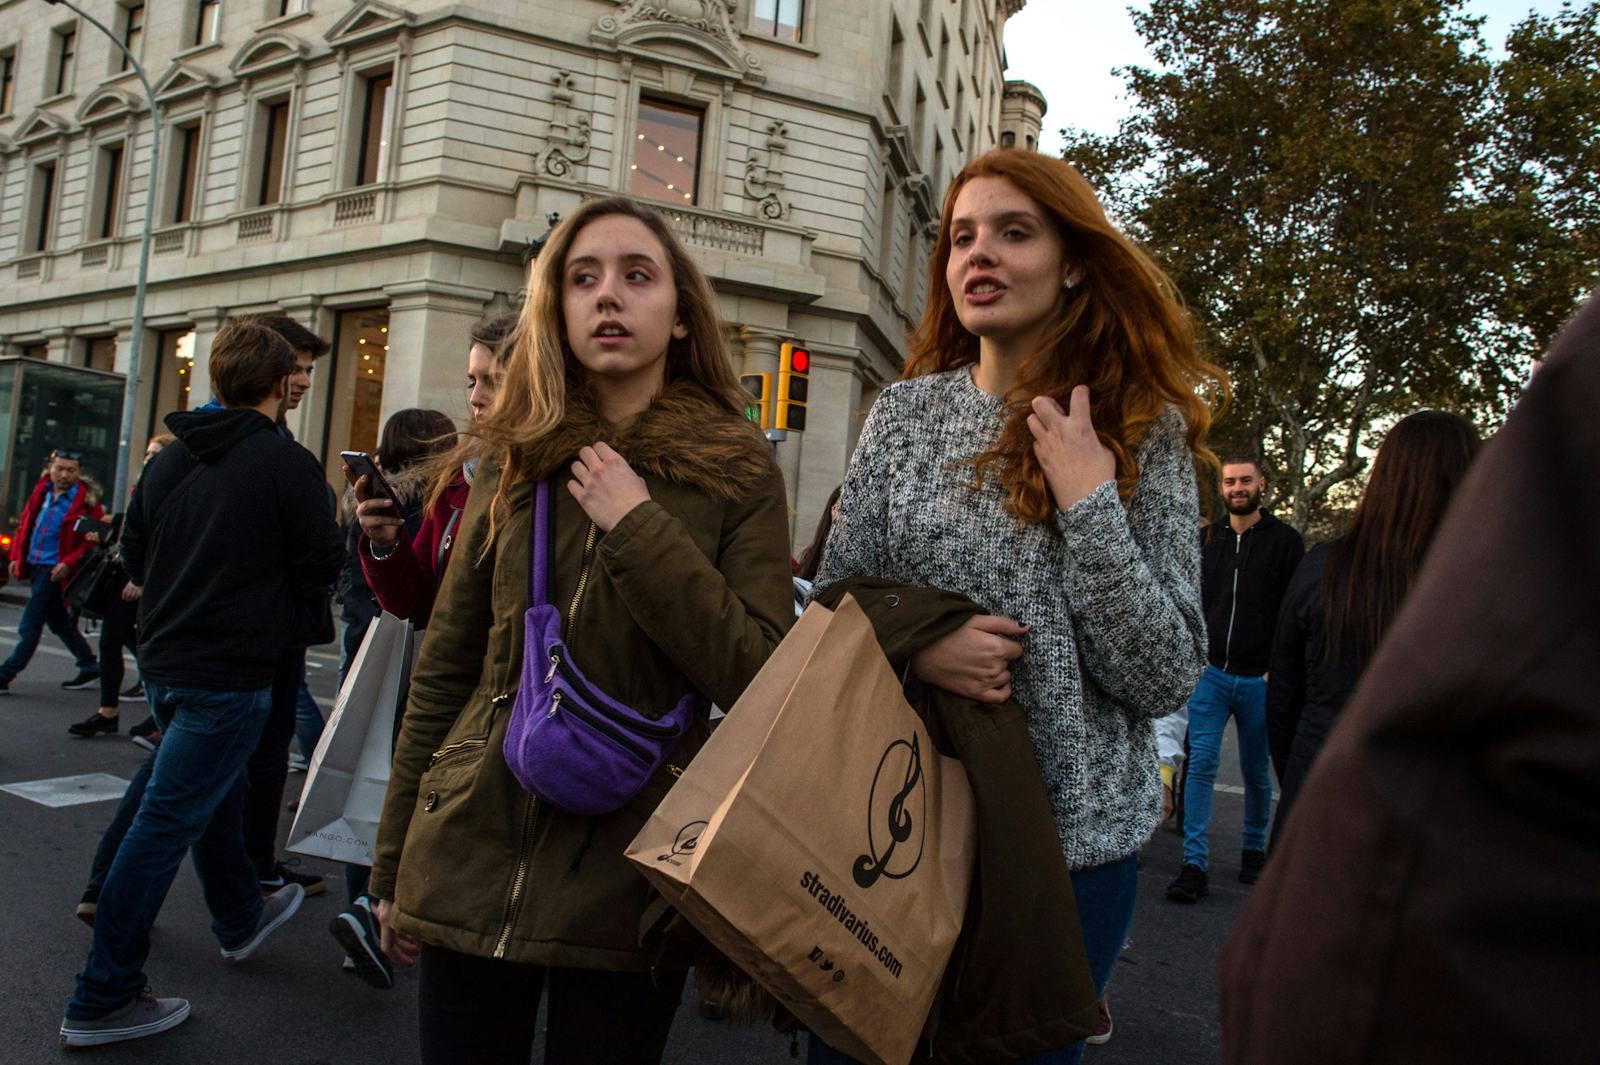 Is Black Friday Celebrated In Other Countries? It's Not Exclusive To The US